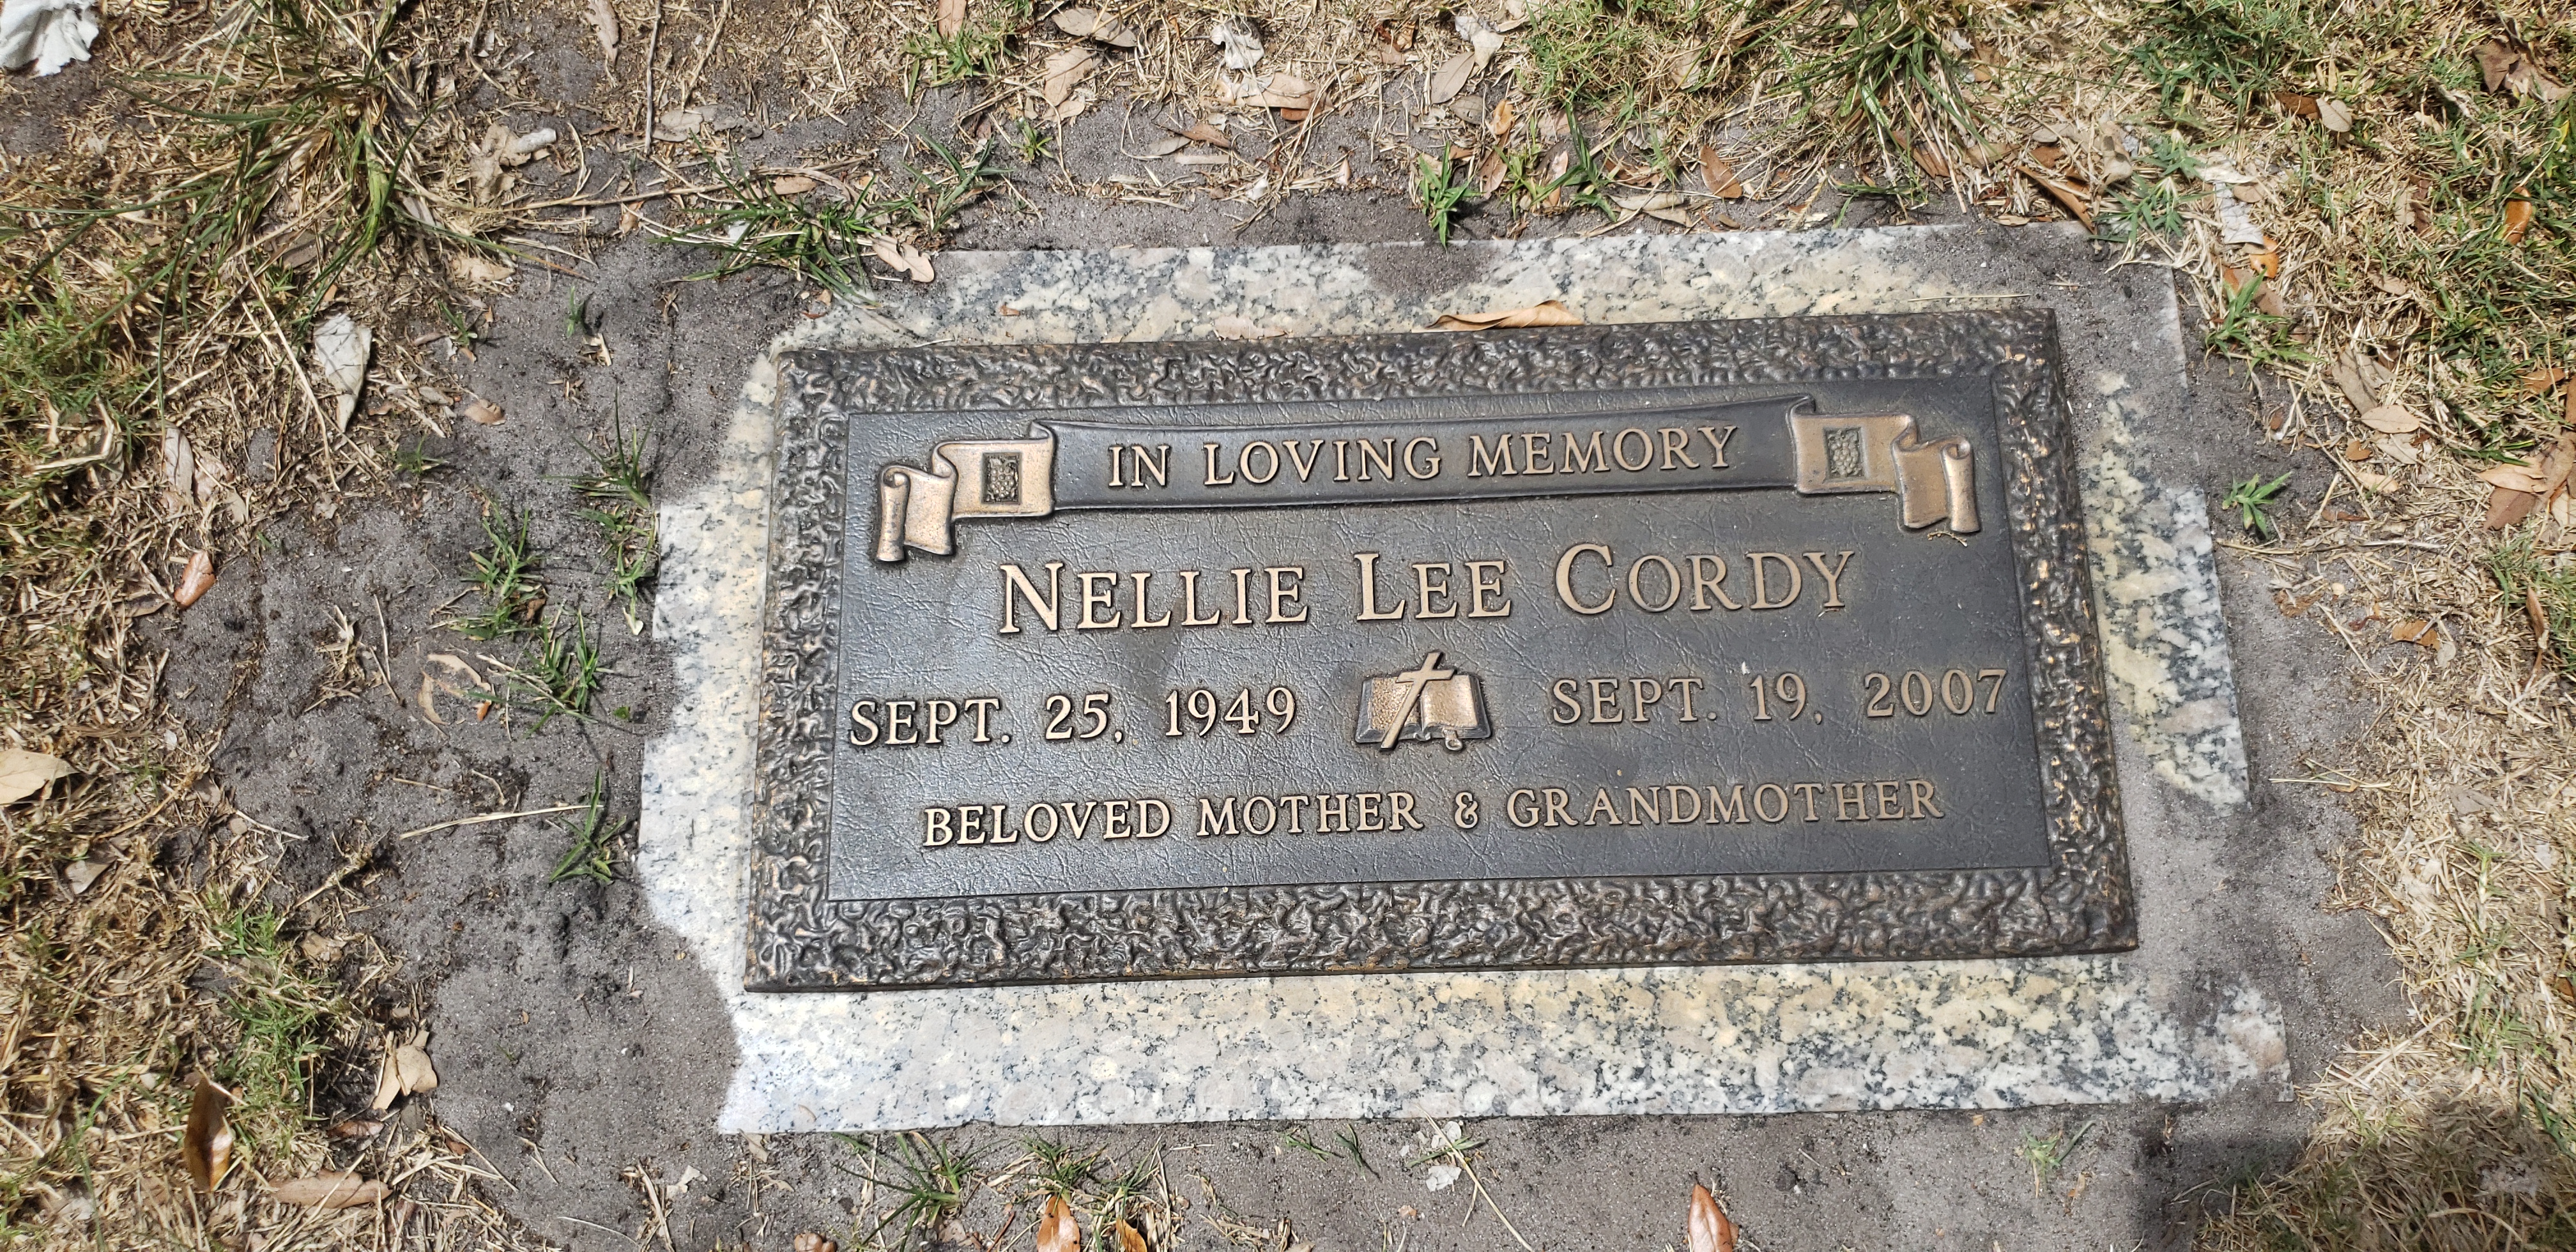 Nellie Lee Cordy